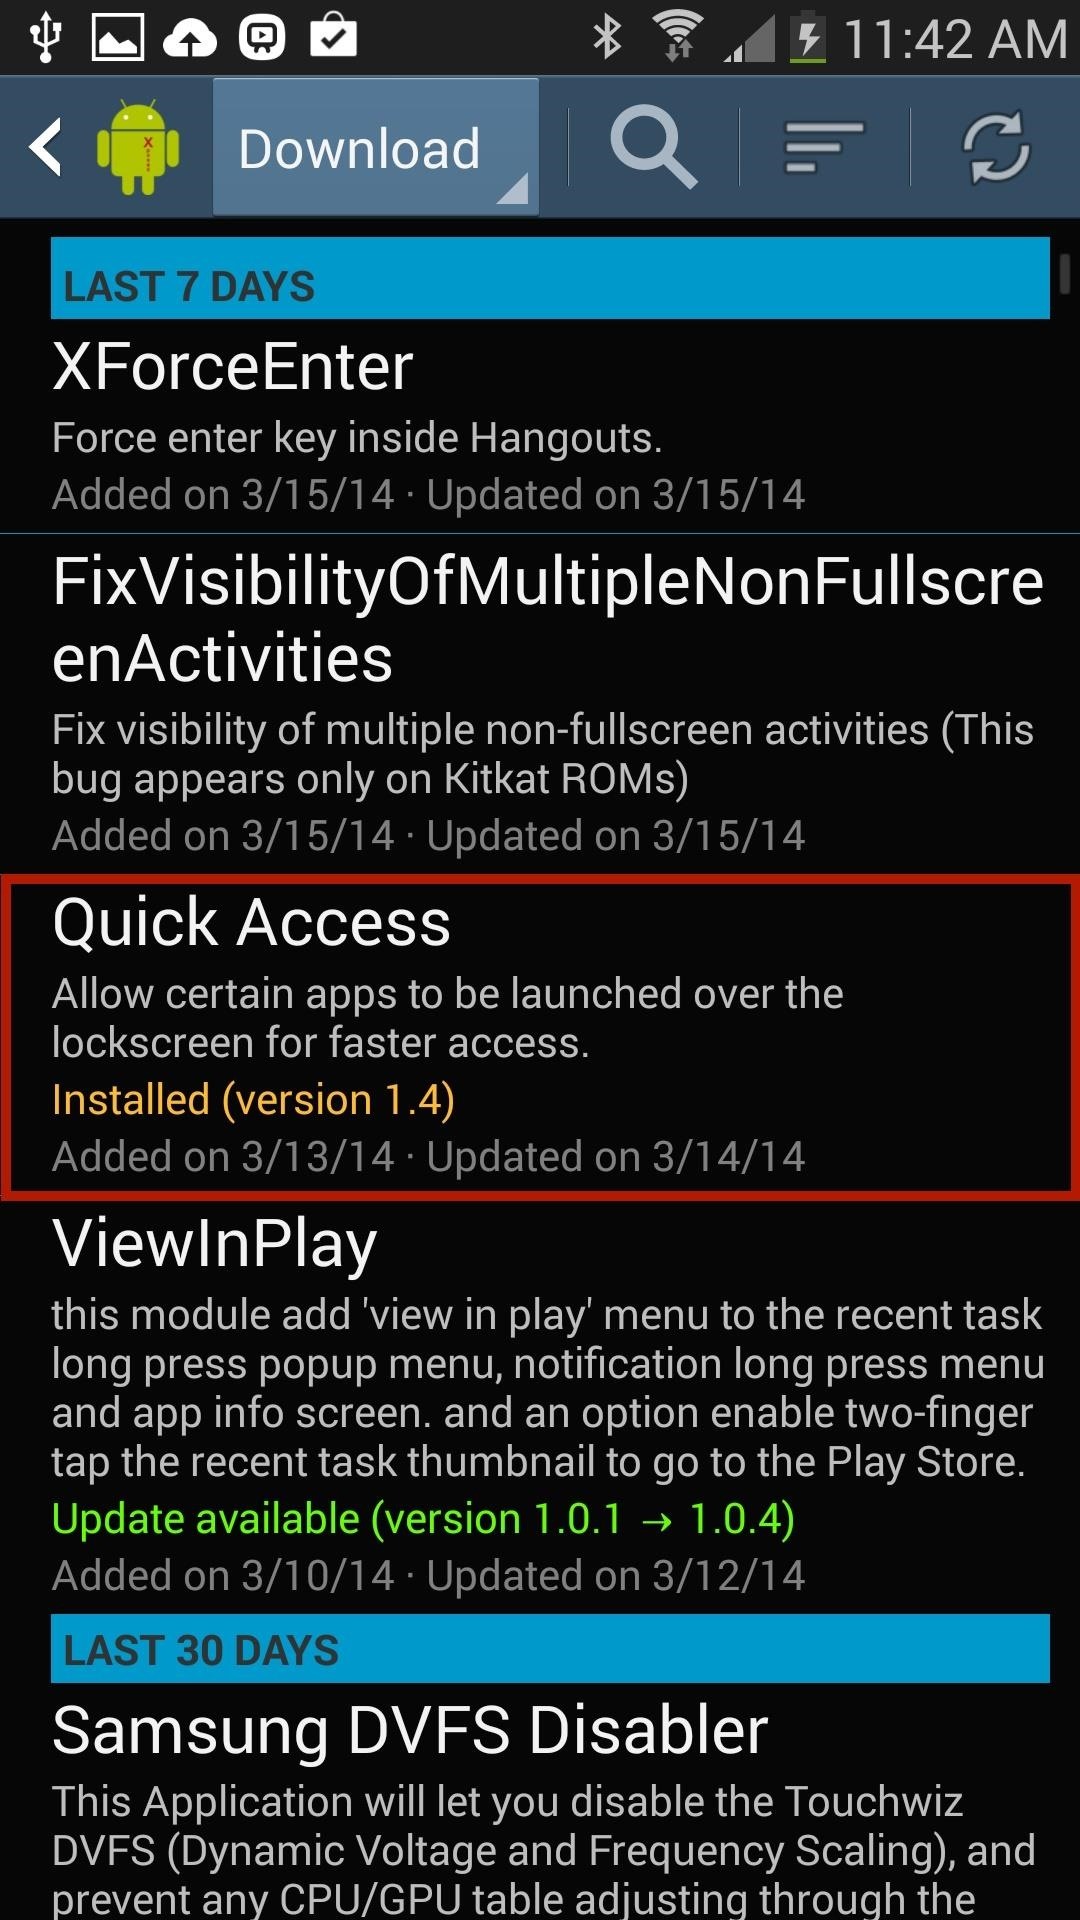 How to Bypass the Lock Screen for Instant Access to the Last Used App on Your Galaxy Note 3